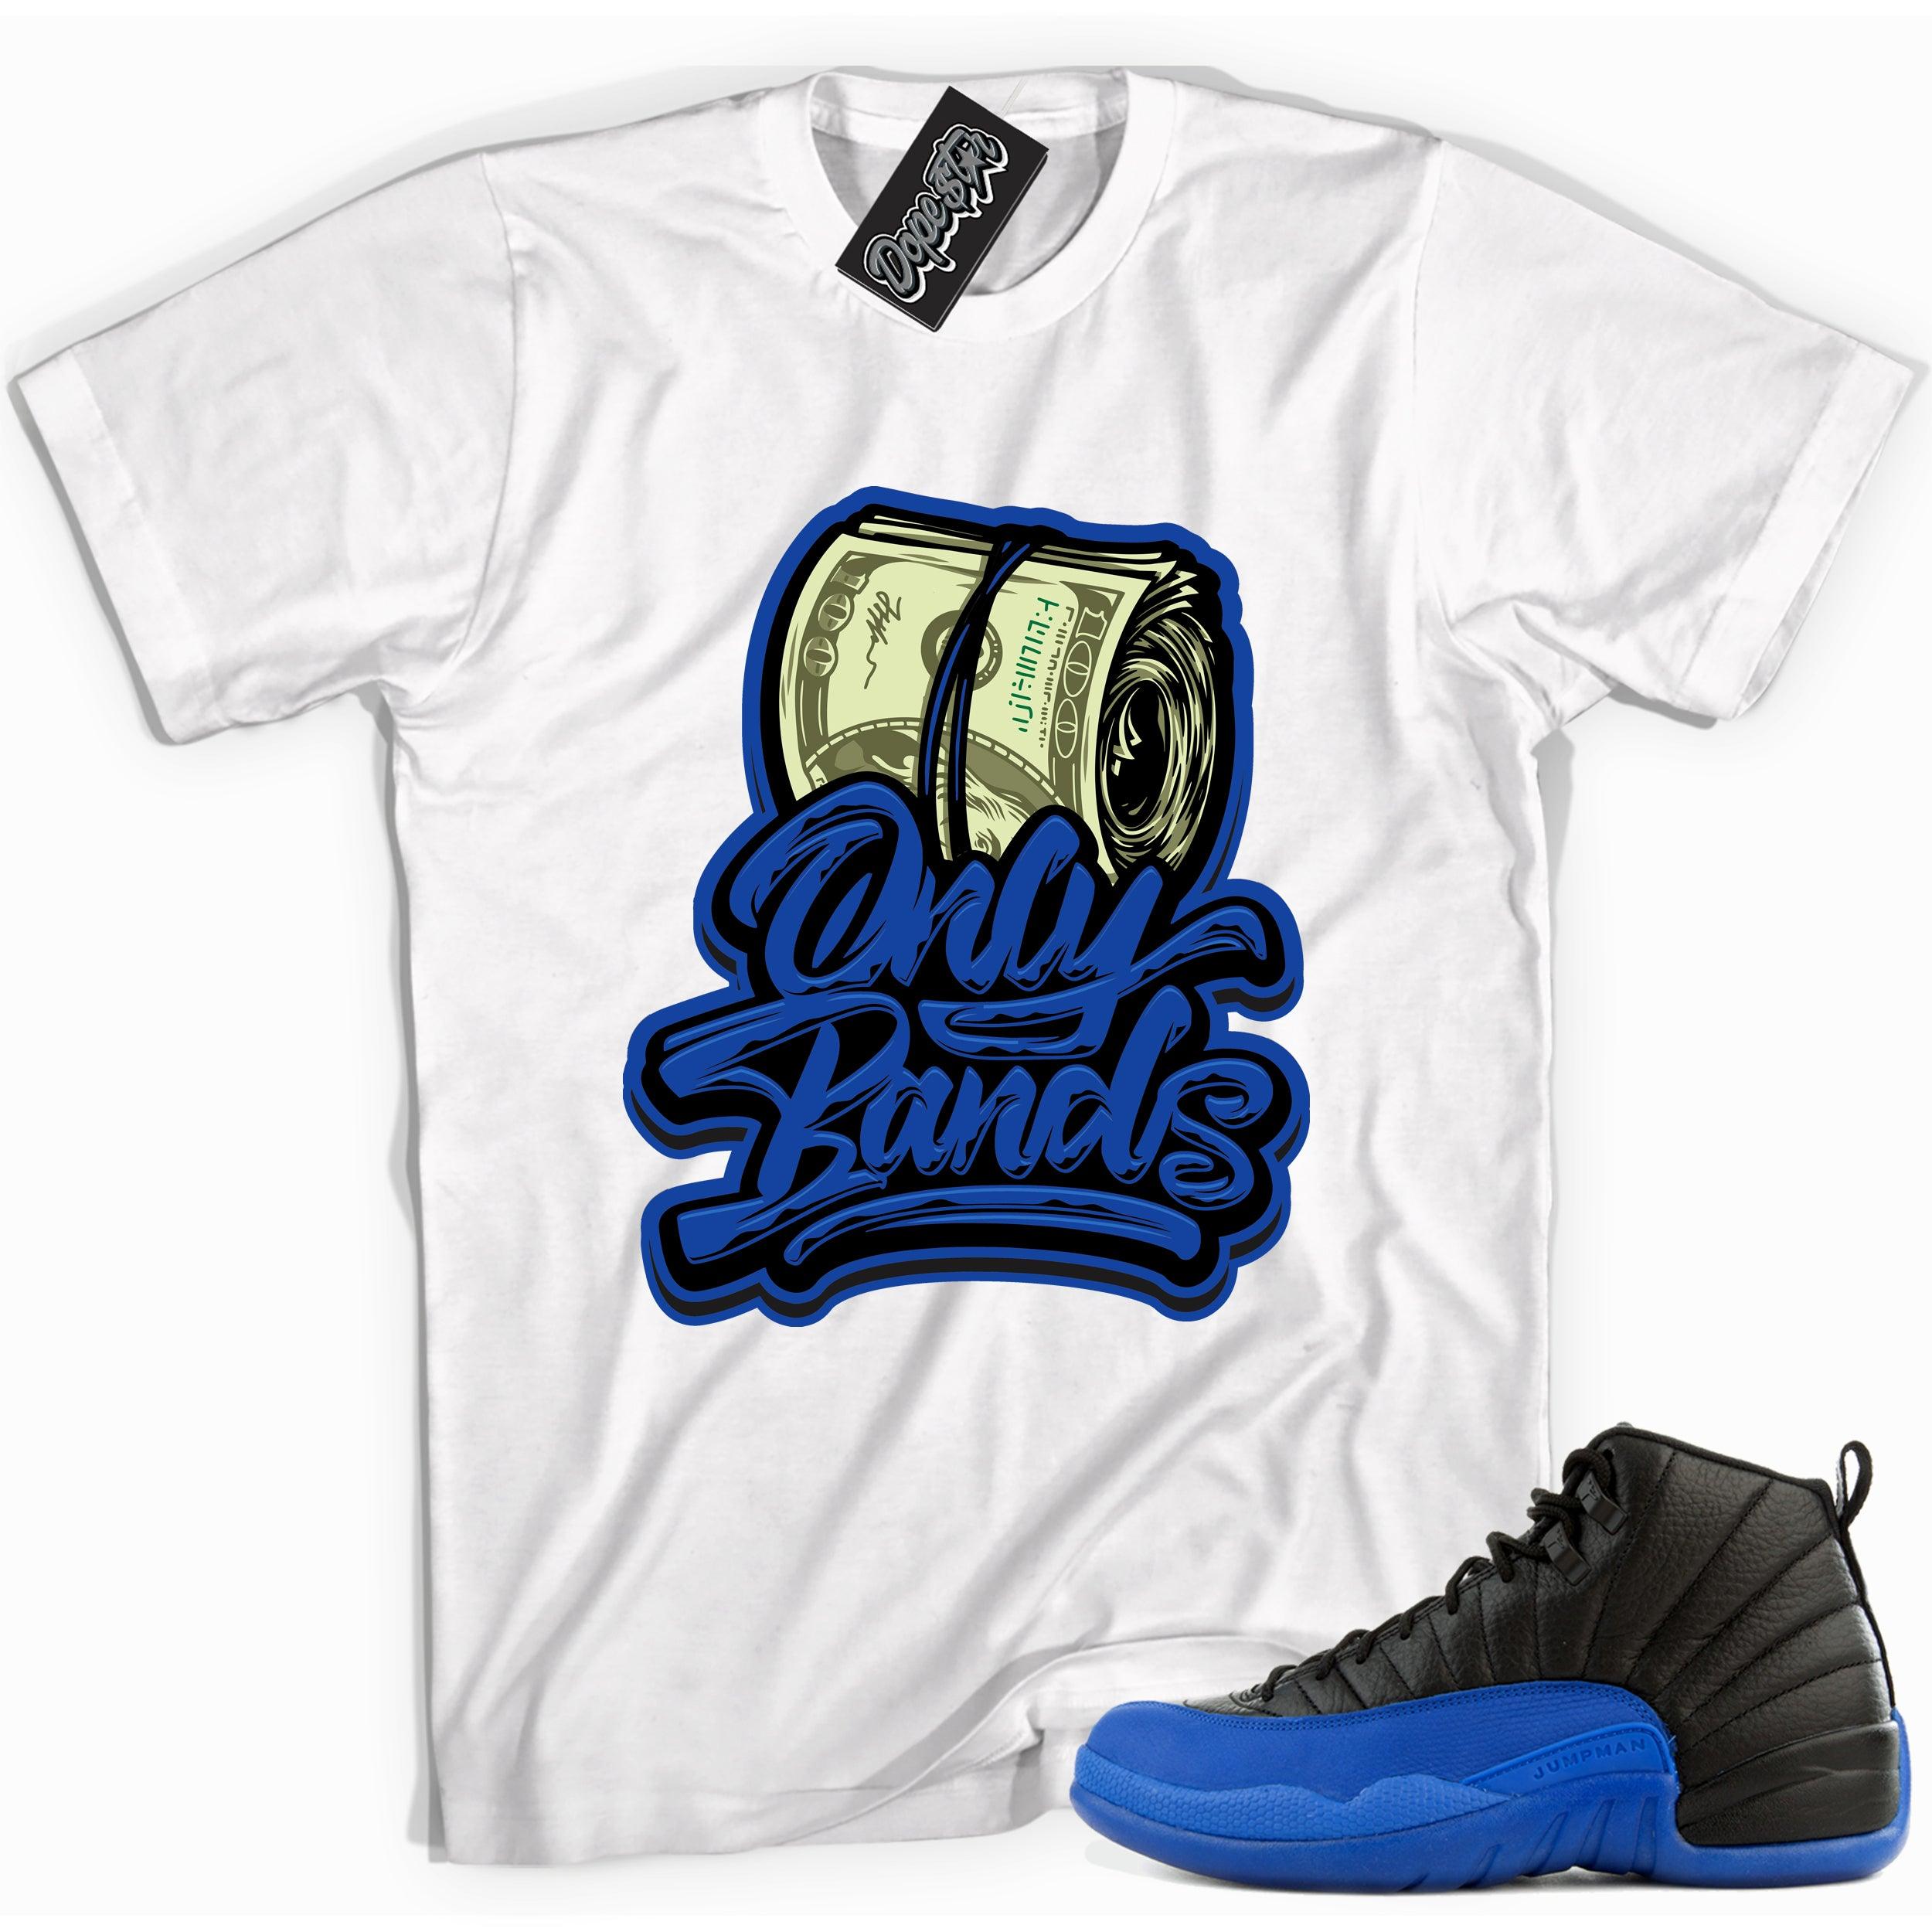 Cool white graphic tee with 'only bands' print, that perfectly matches Air Jordan 12 Retro Black Game Royal sneakers.